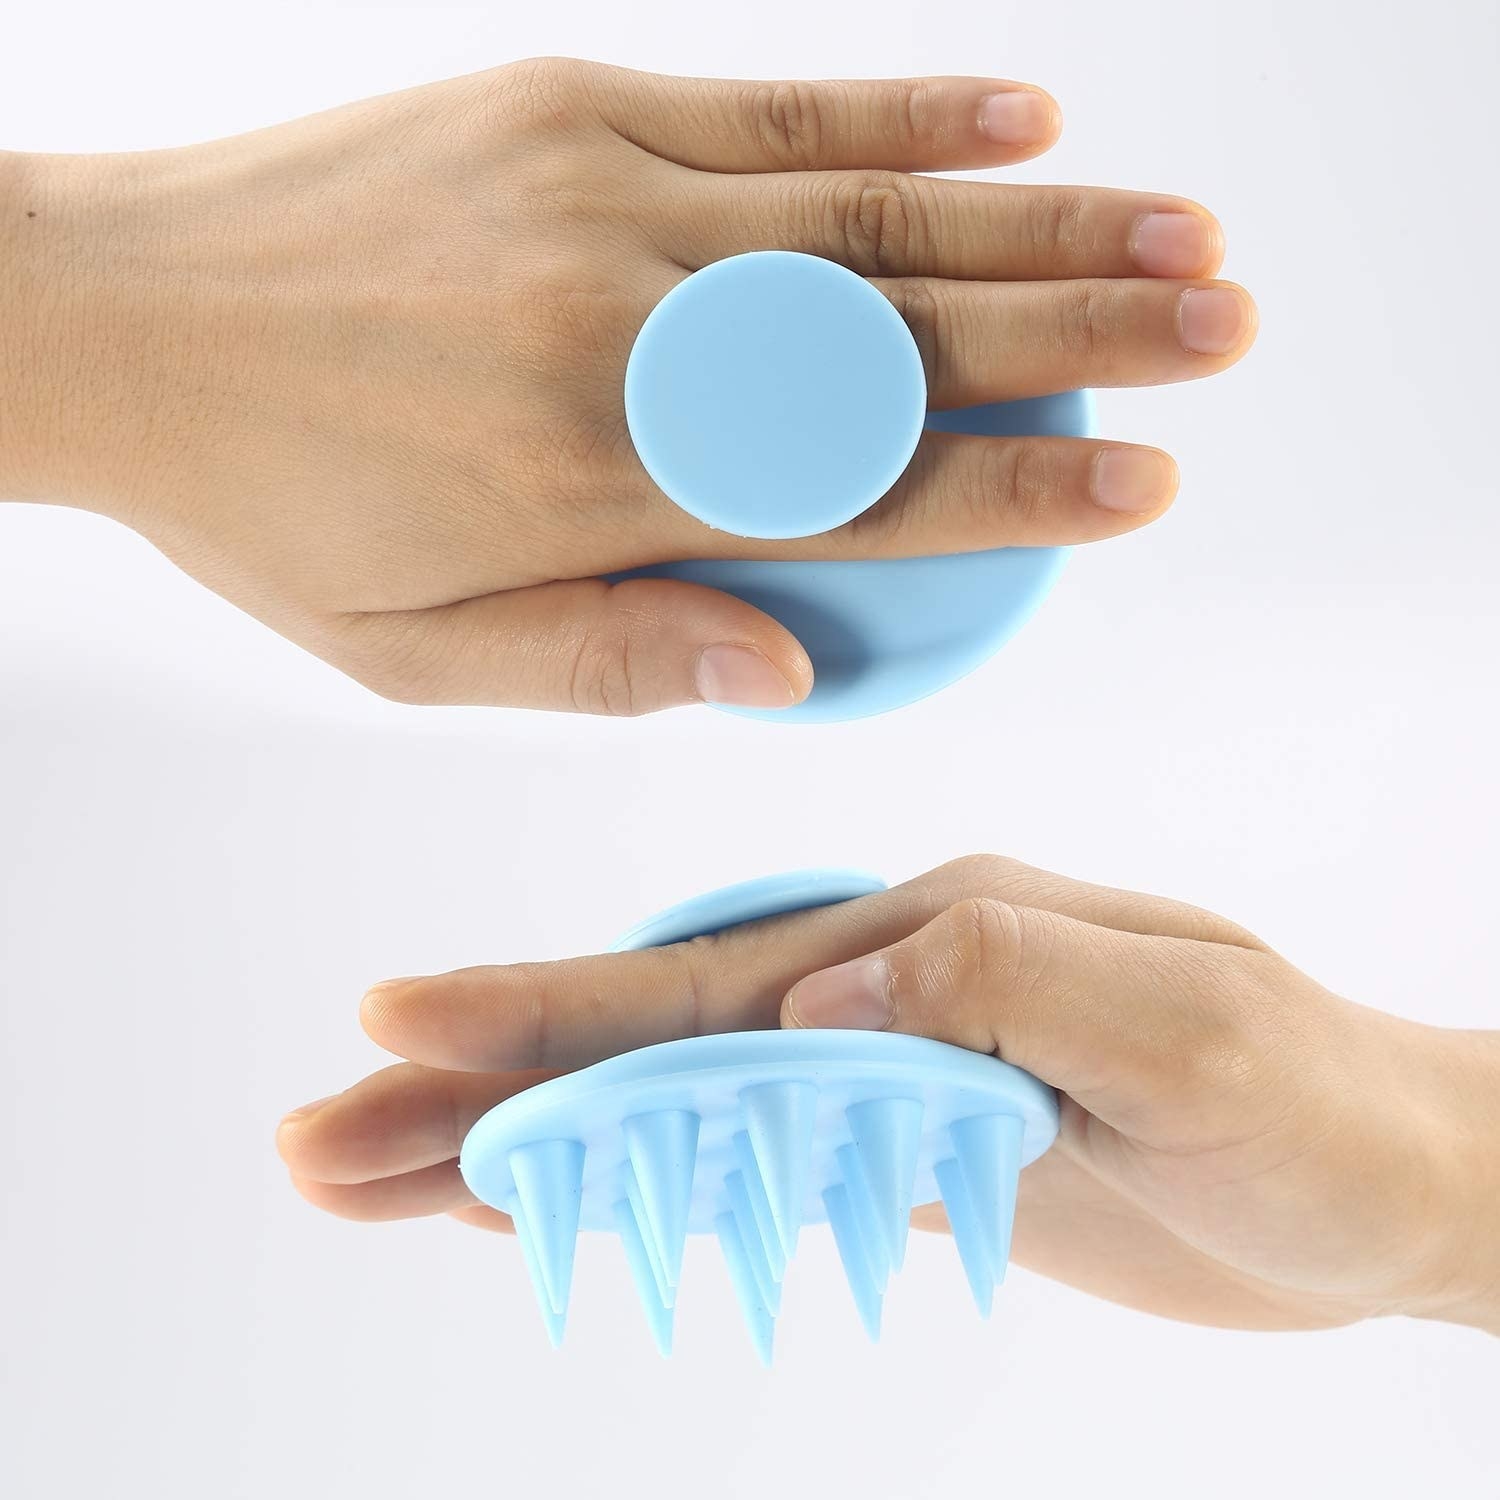 A person holding the shampoo brush